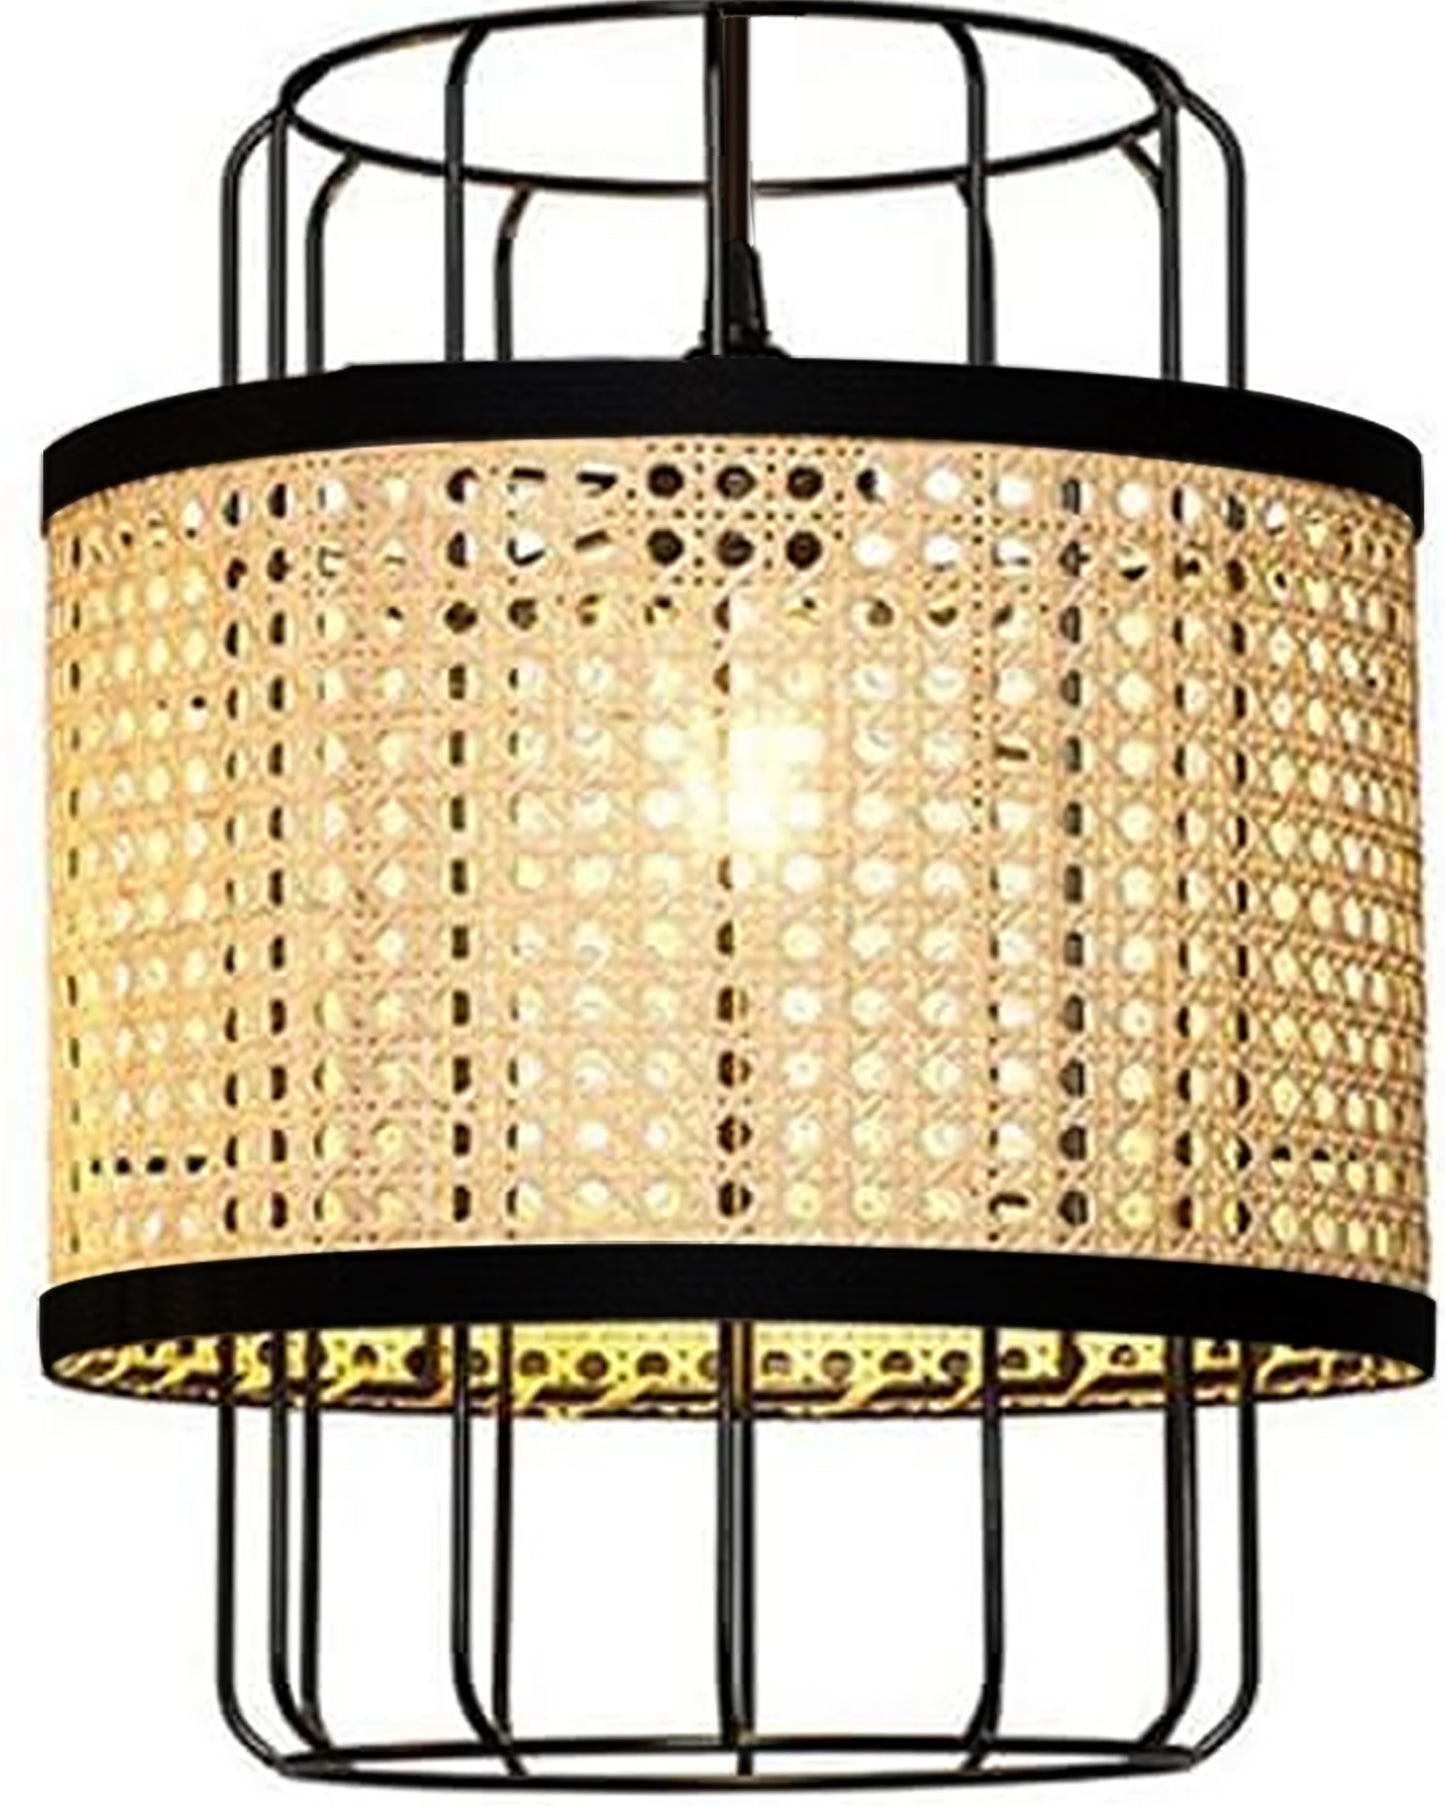 12" Hand Woven Natural Rattan Cane Webbing Wicker Pendant Light Fixtures, Boho Pendant Lights with Rattan Basket Shade for Farmhouse Kitchen Island Dining Room Living Room